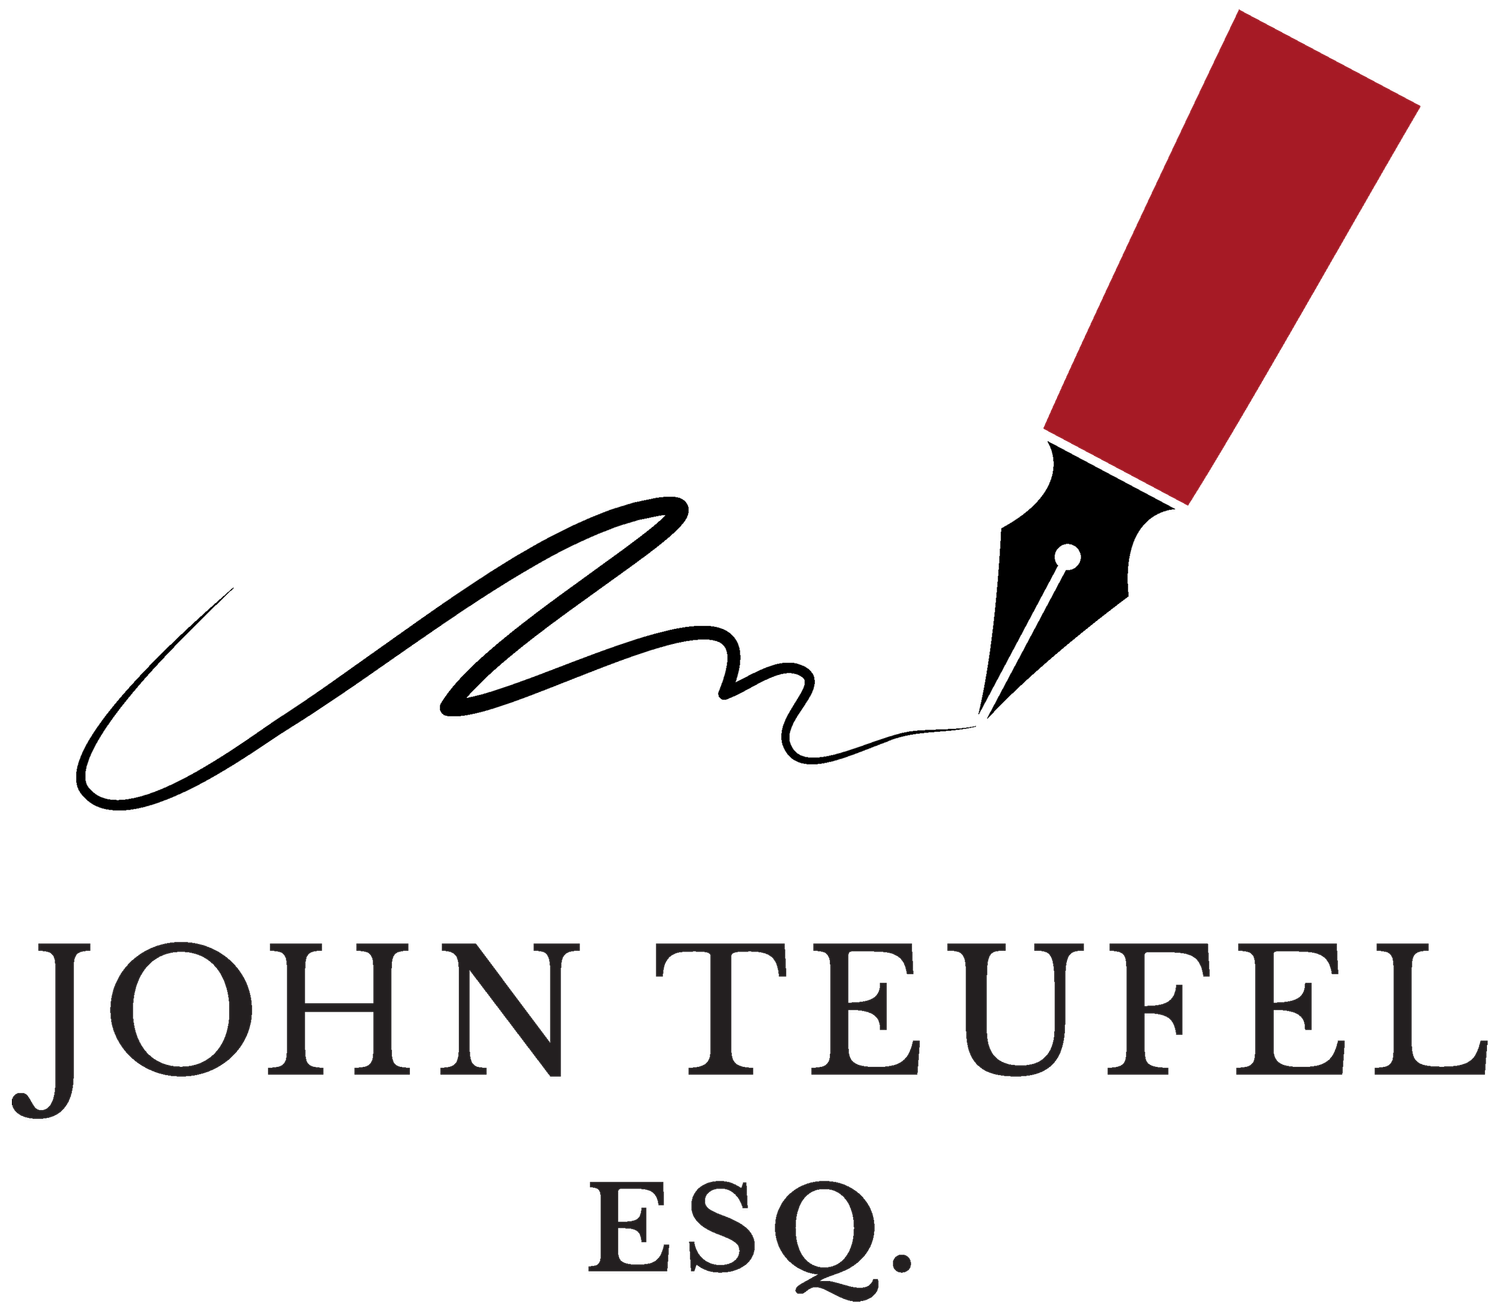 John Teufel, Esq., Legal Writing and Family Law Appeals